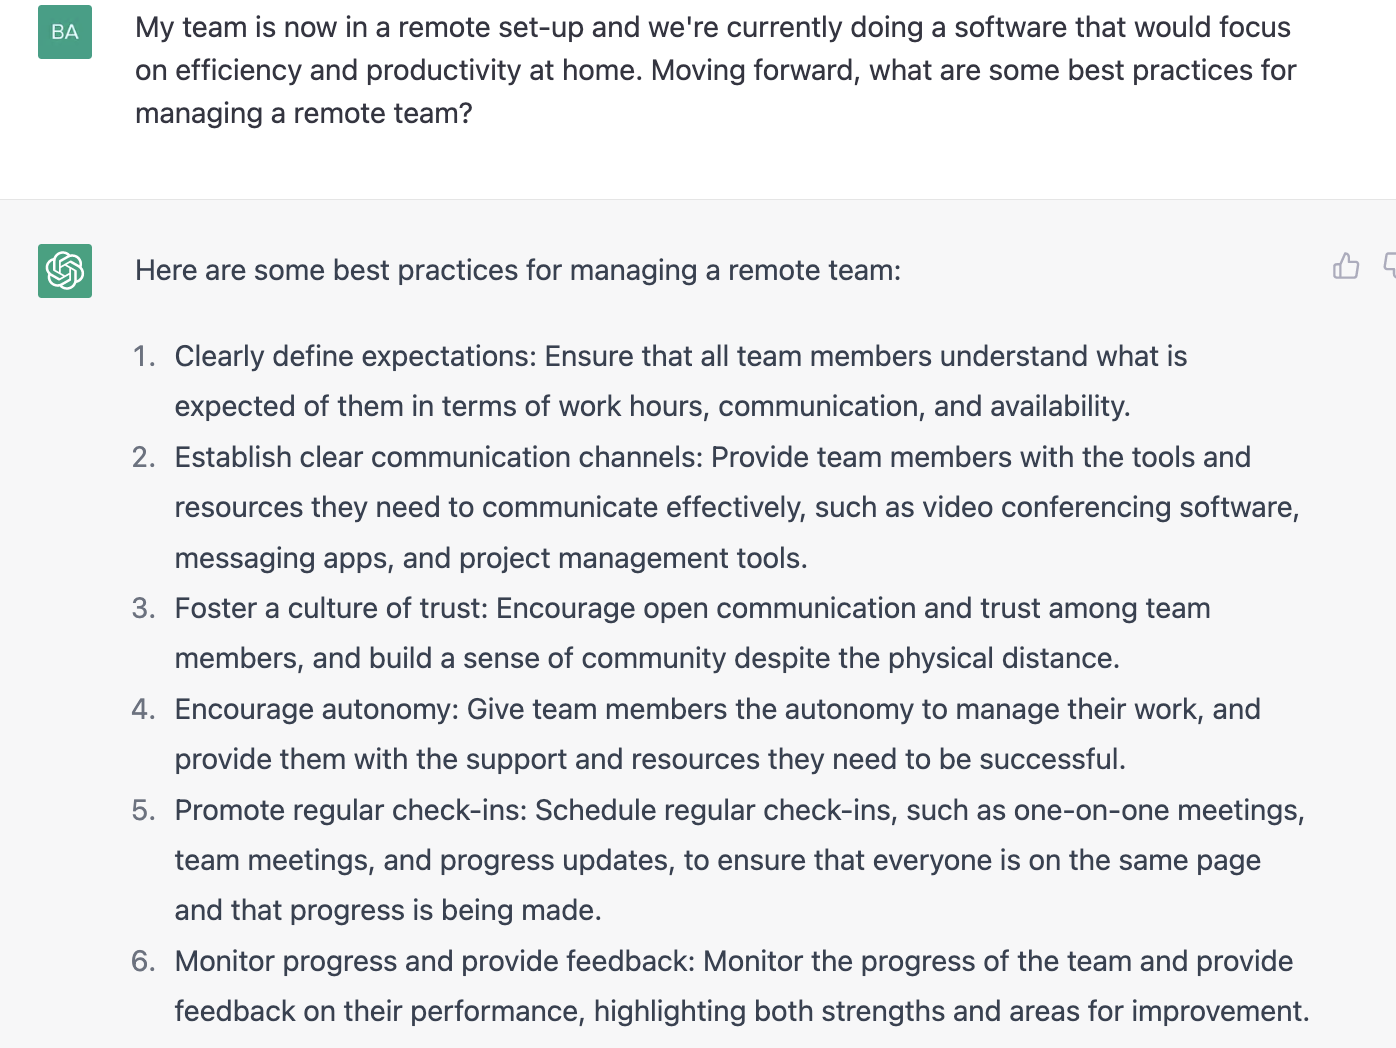 ChatGPT prompt about some best practices for managing a remote team